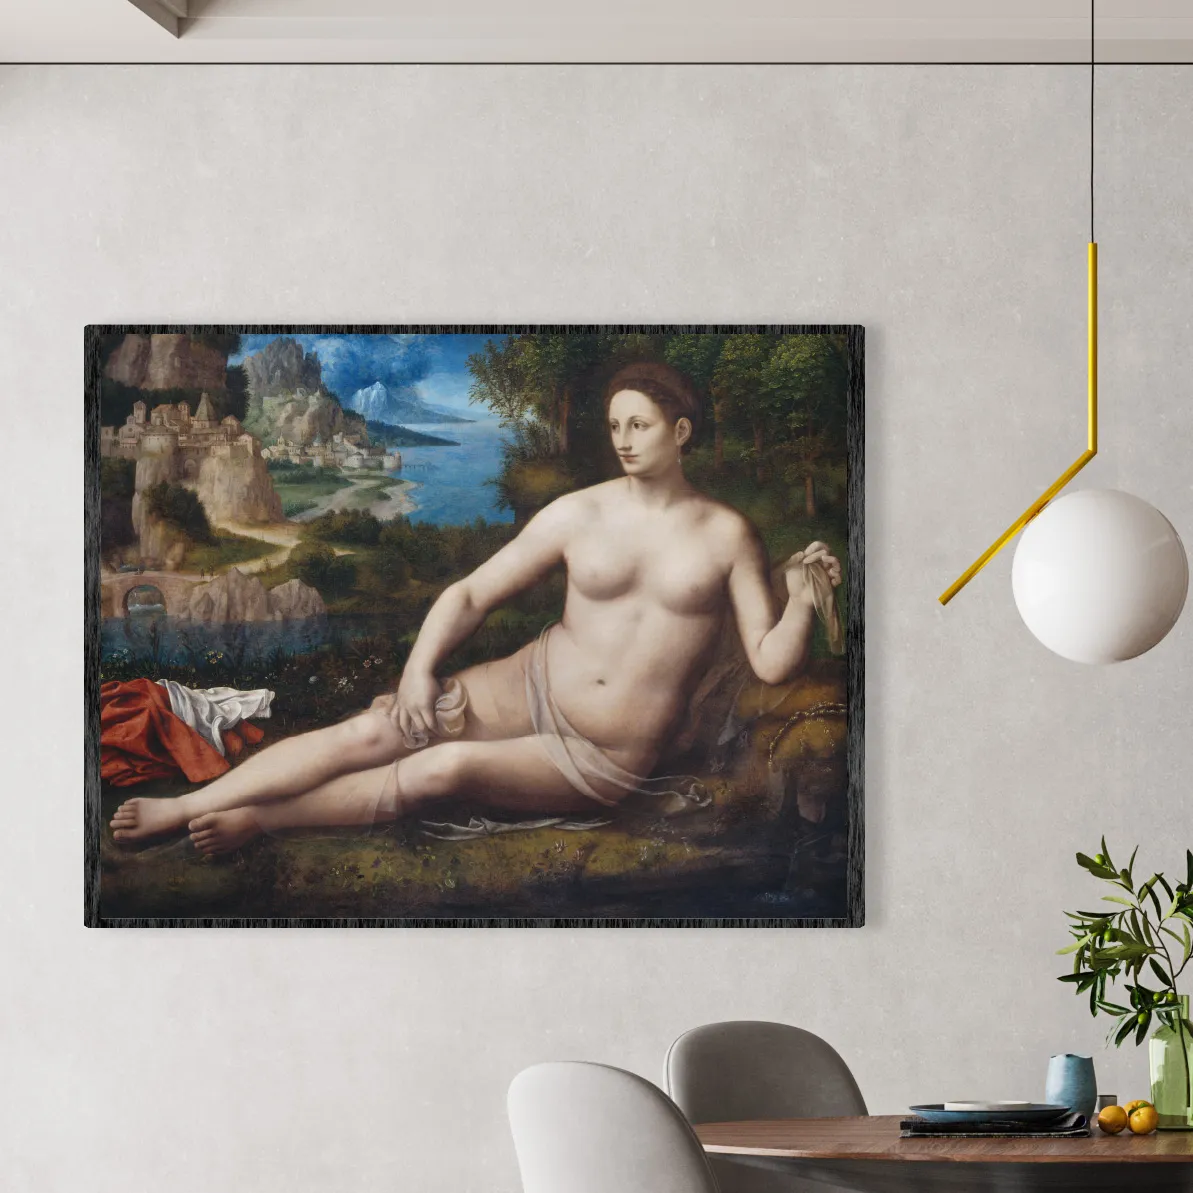 Customize Classical Nude Figure Painting Wall Art Home Decor Girls Wall Pictures Wall Art Living Room Custom Painting